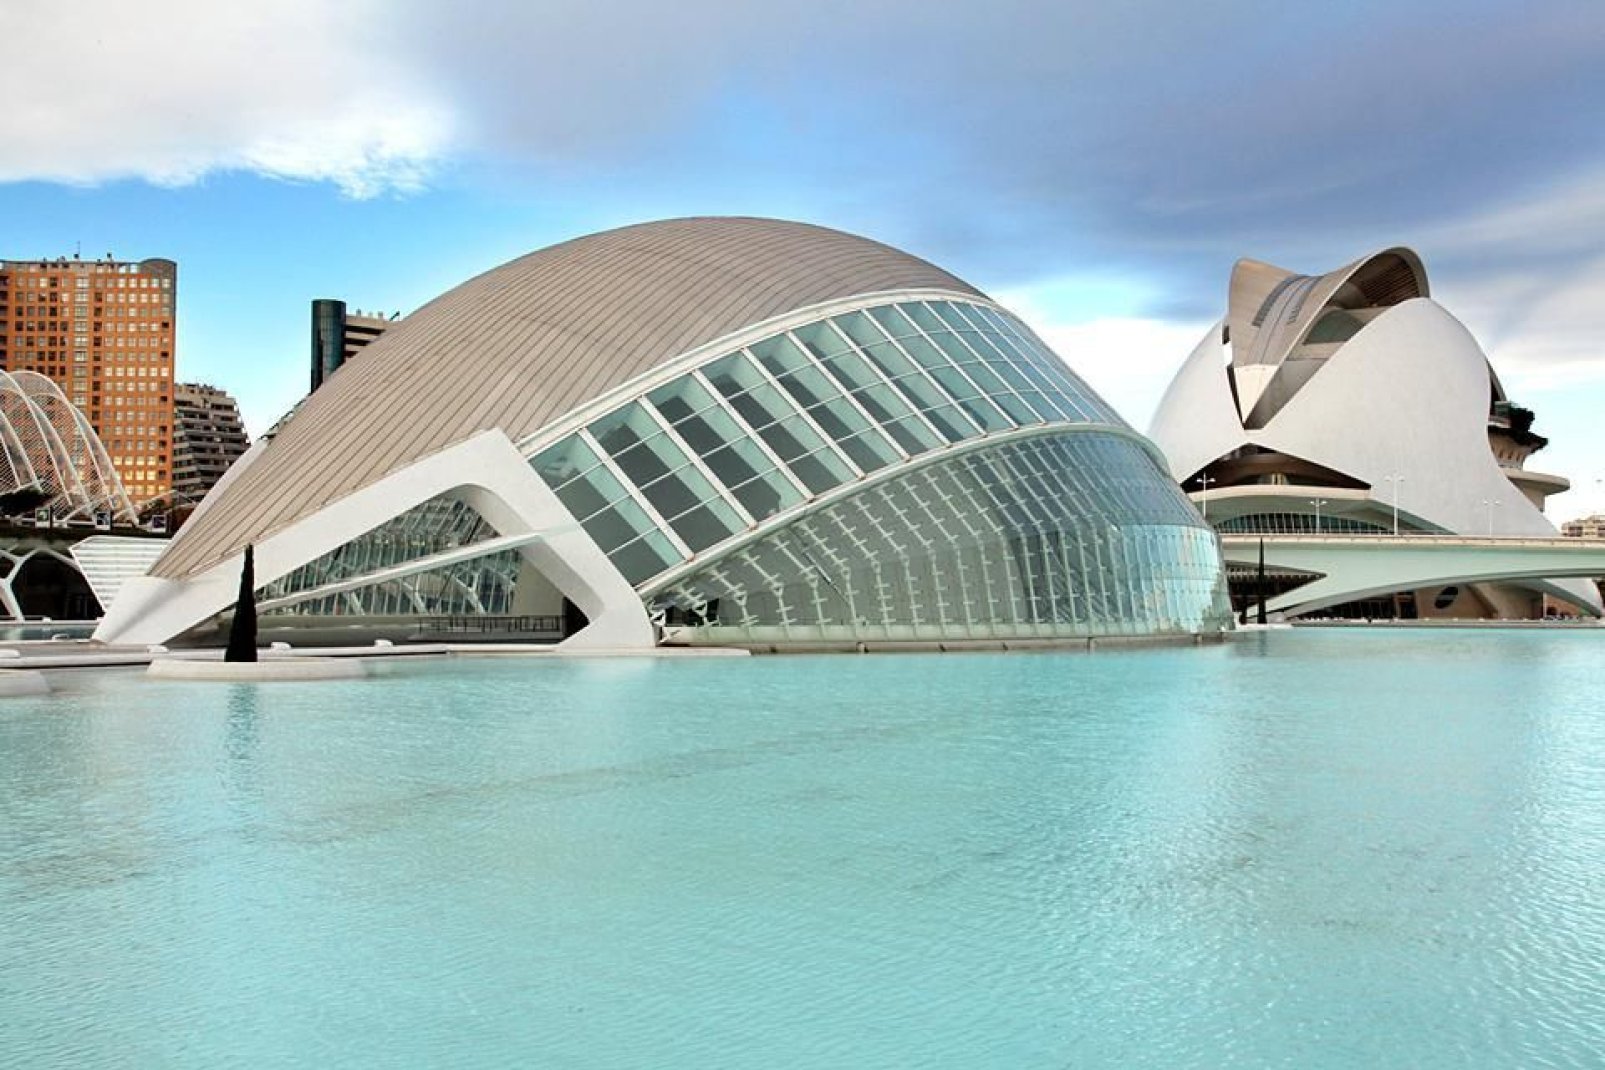 A city with plenty of botanical gardens, Valencia also has an Arts and Sciences Museum with very original architecture that shouldn't be missed.